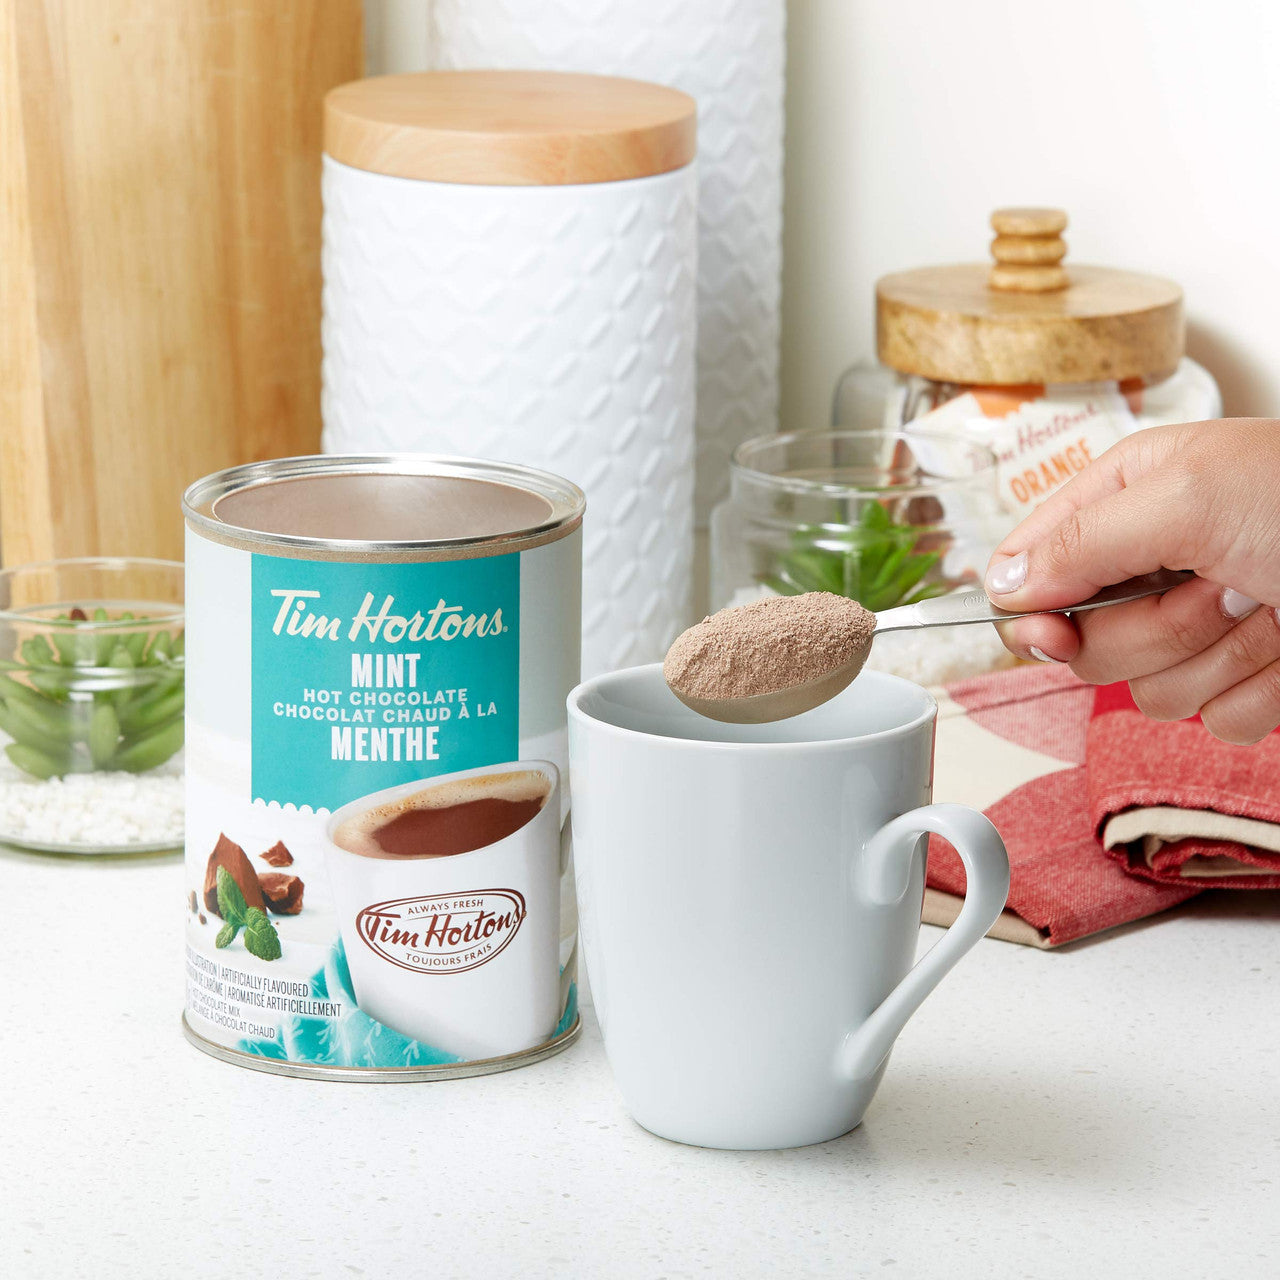 Tim Hortons Mint Hot Chocolate Can, 500g/17.6oz., (Imported from Canada)